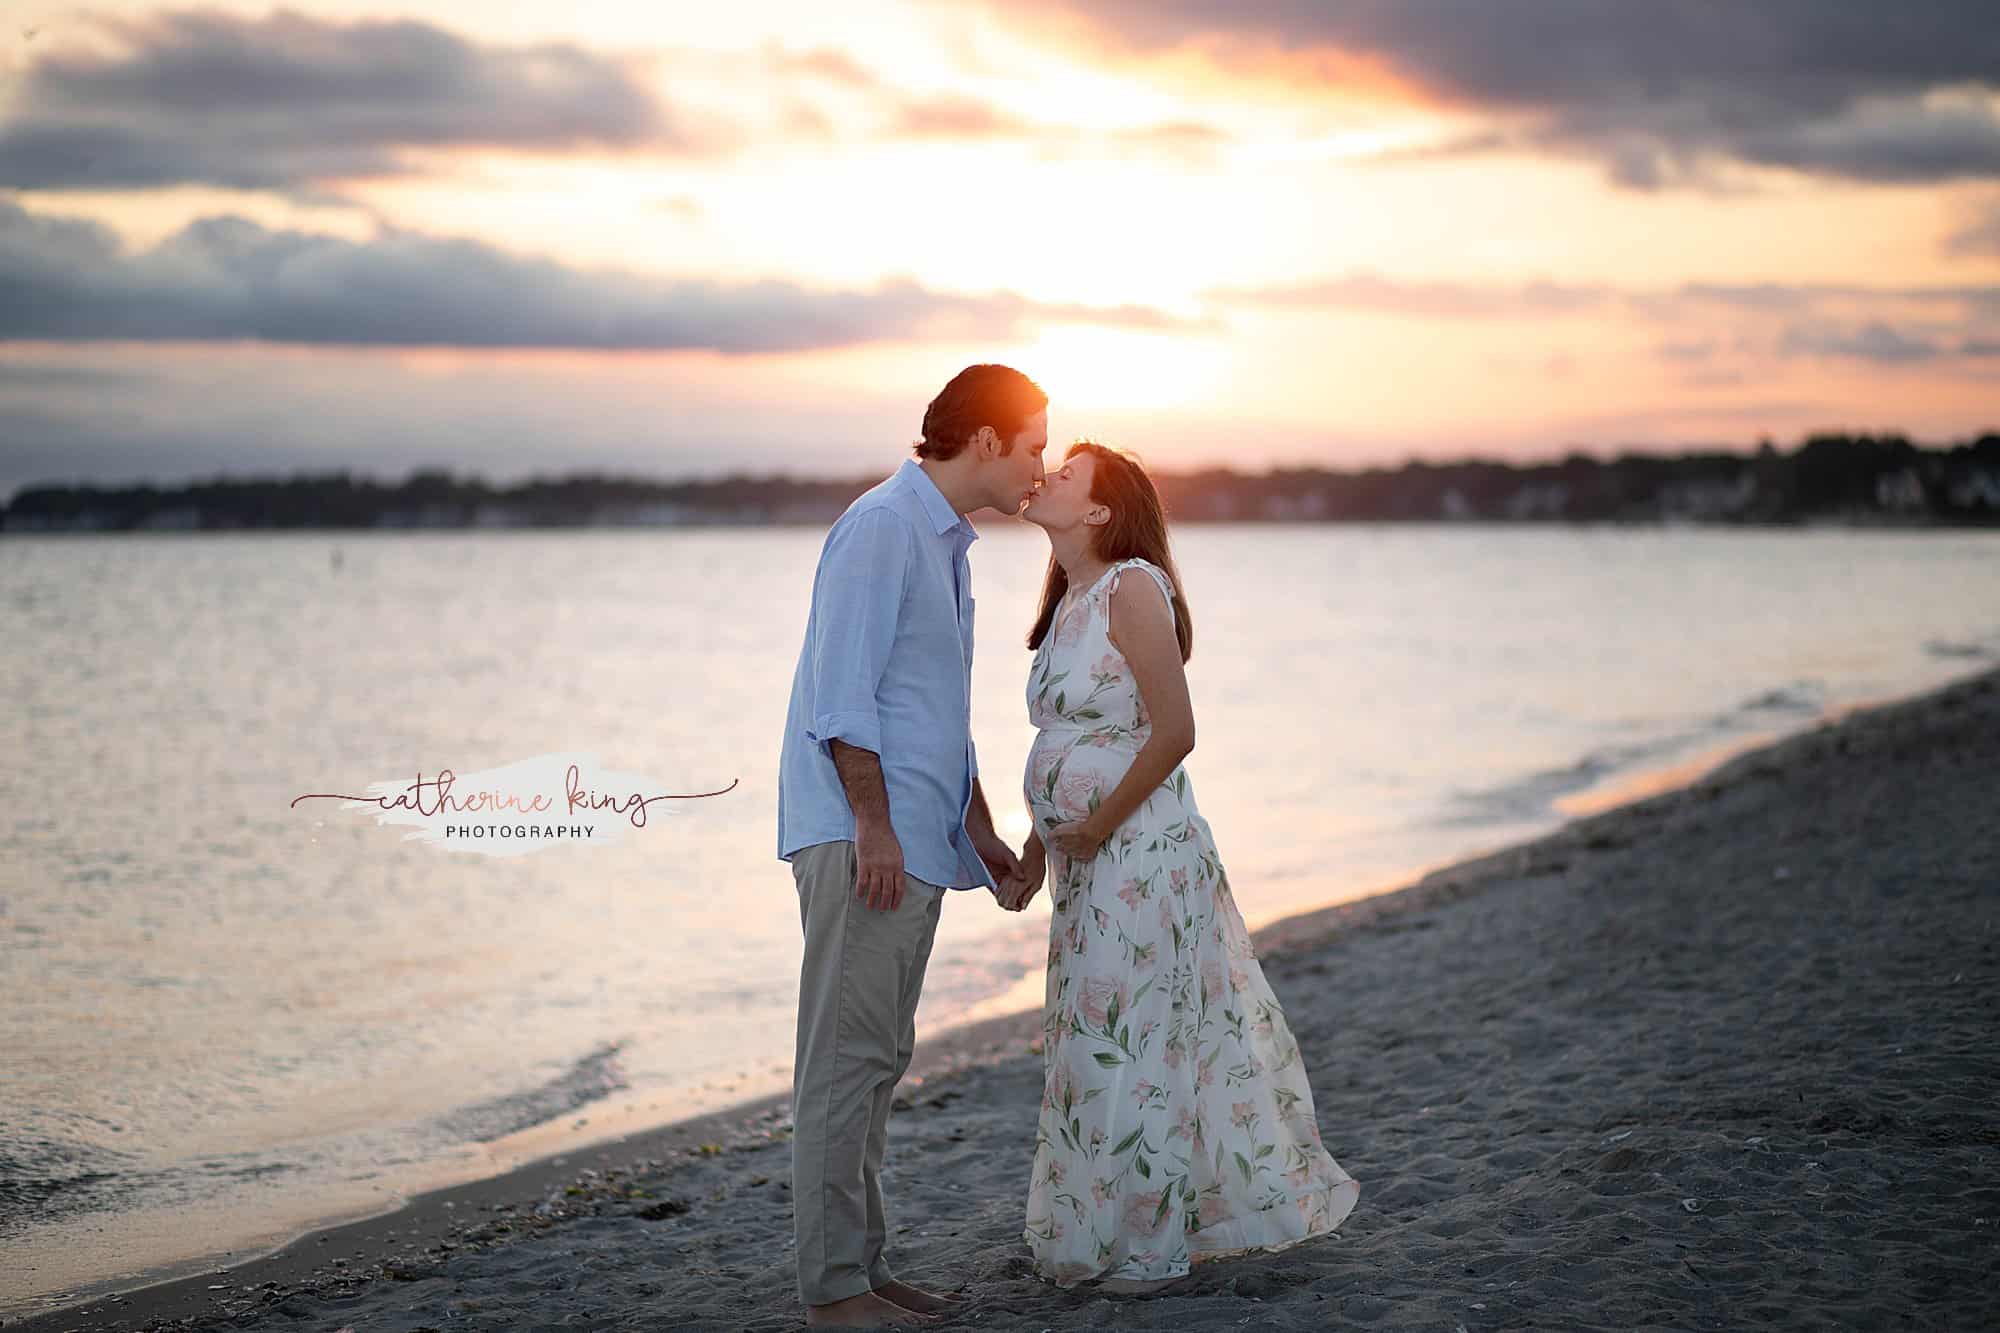 summer beach sunset maternity photography in madison ct